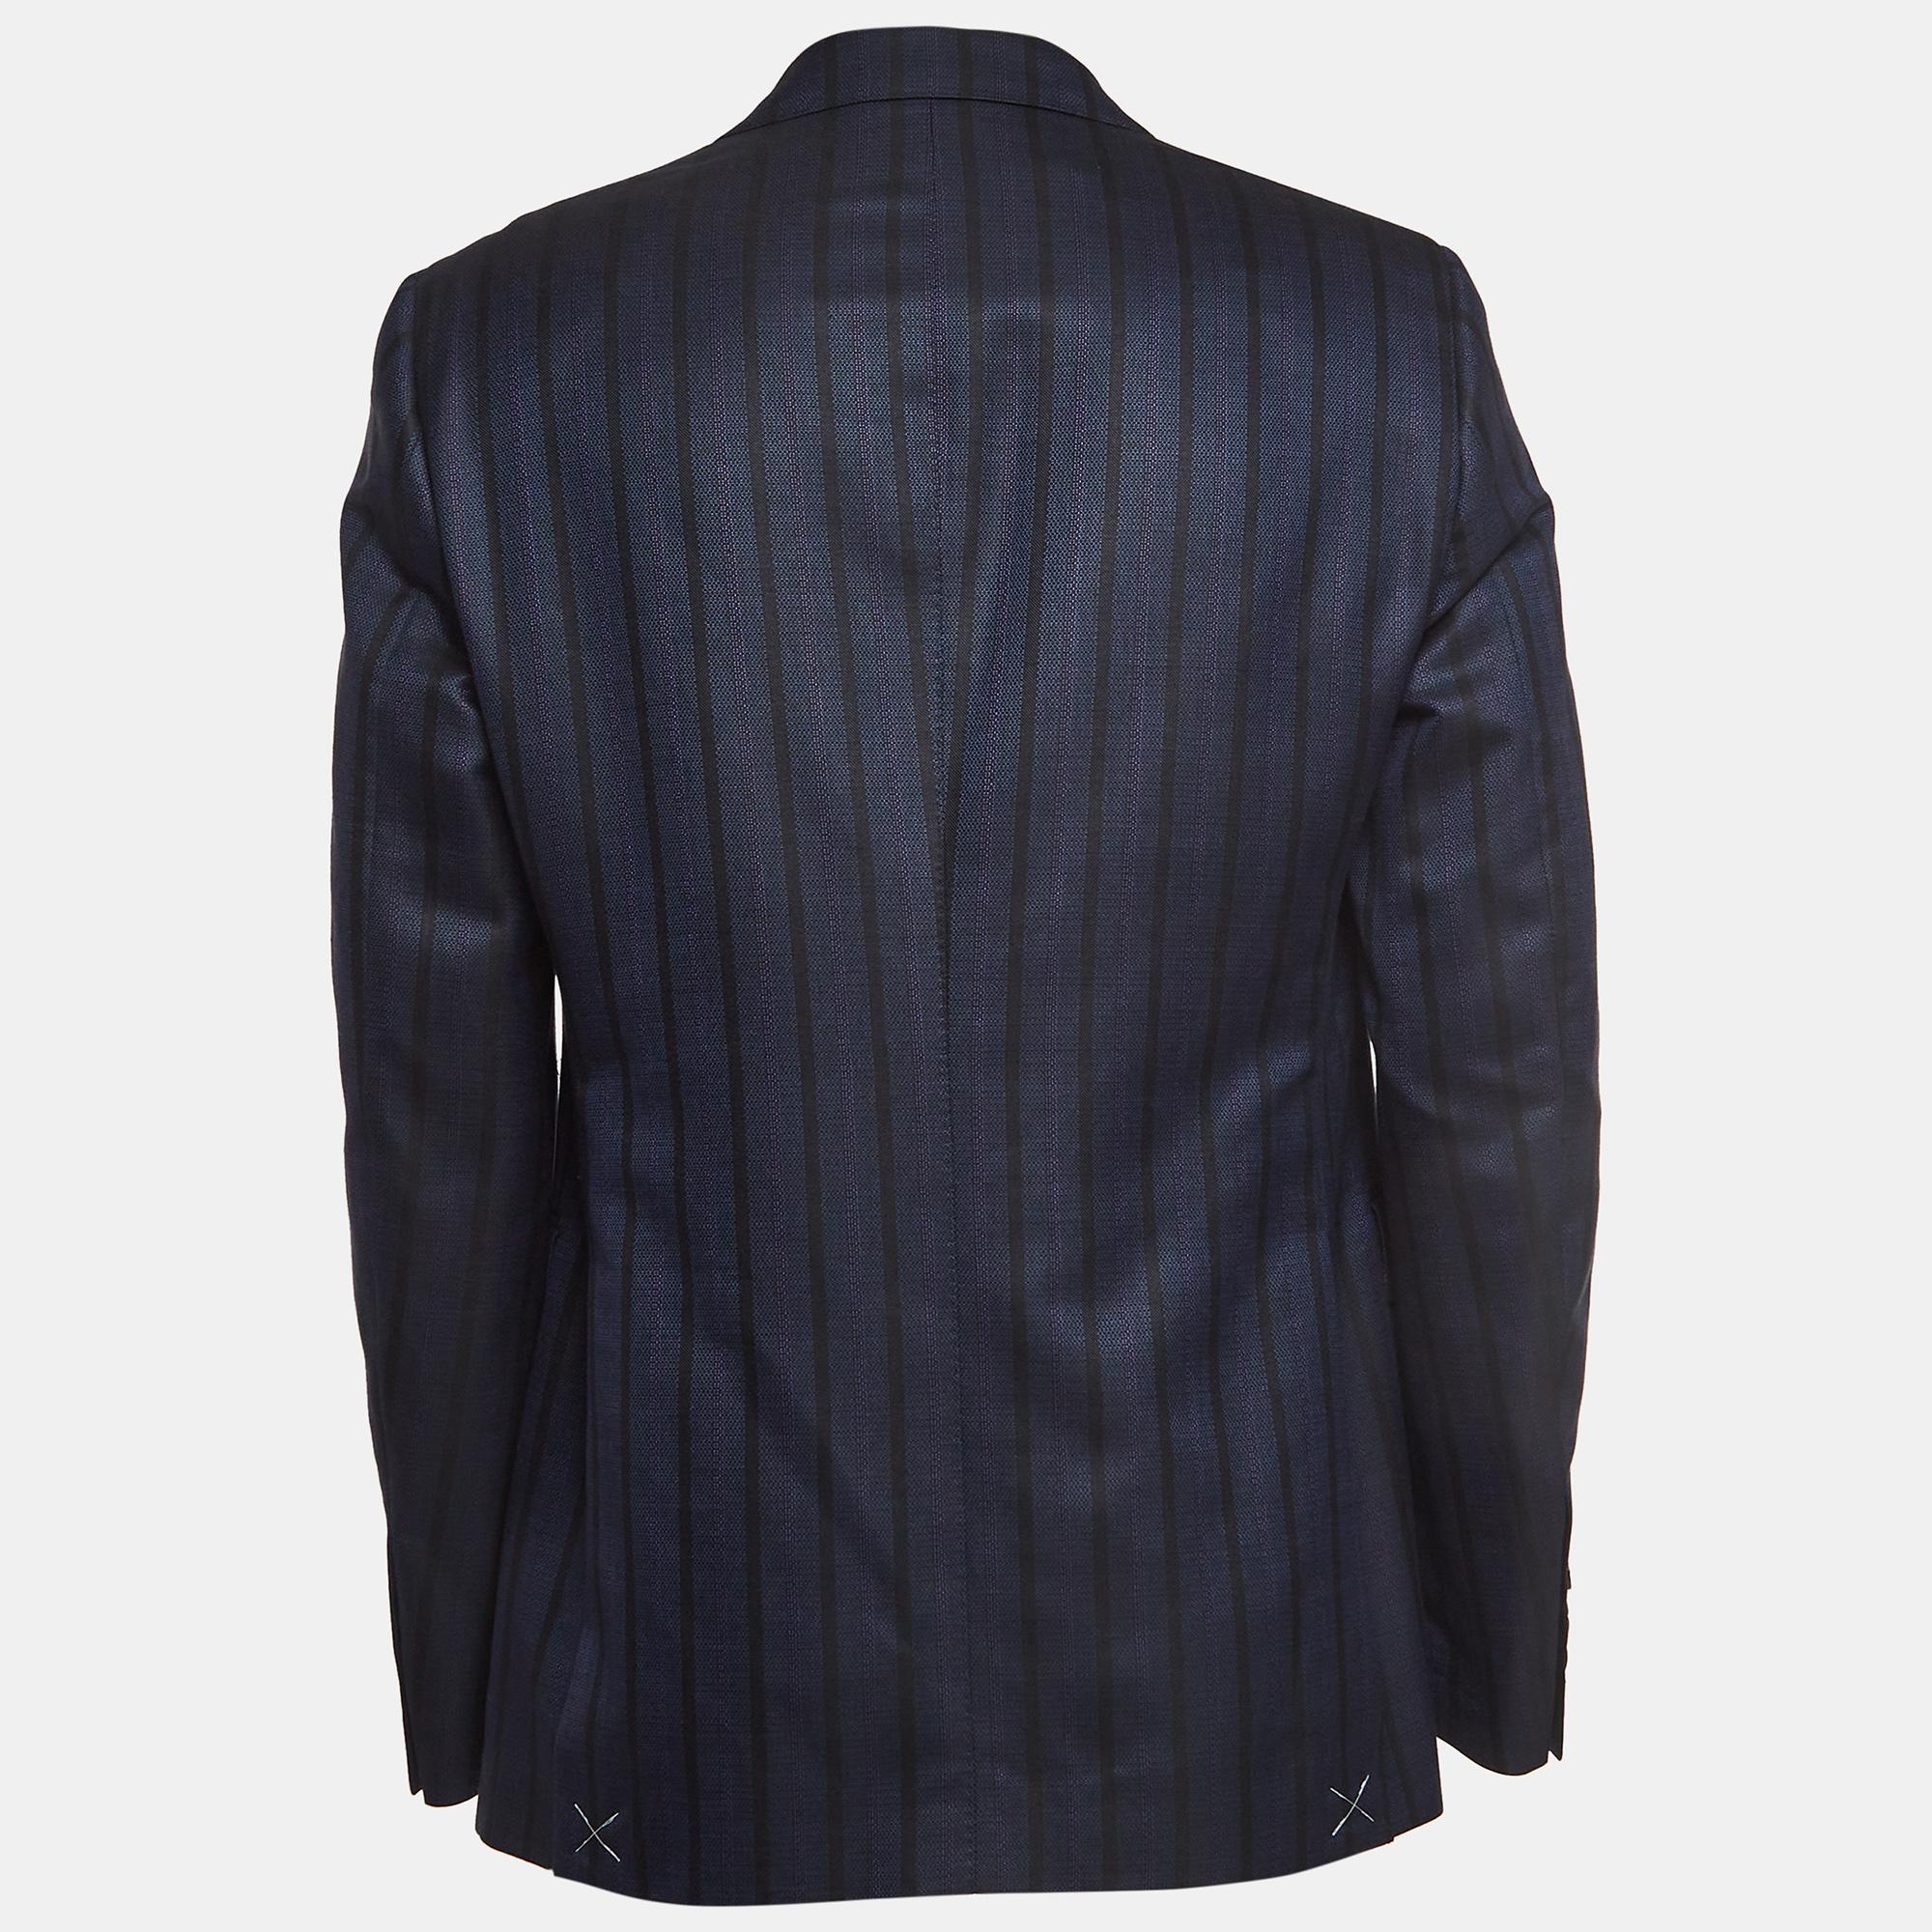 This blazer brings you both class and luxury as you wear it. It is highlighted with long sleeves and classic details, thus granting a polished, formal finish.

Includes
extra button, The Luxury Closet Packaging, Price Tag